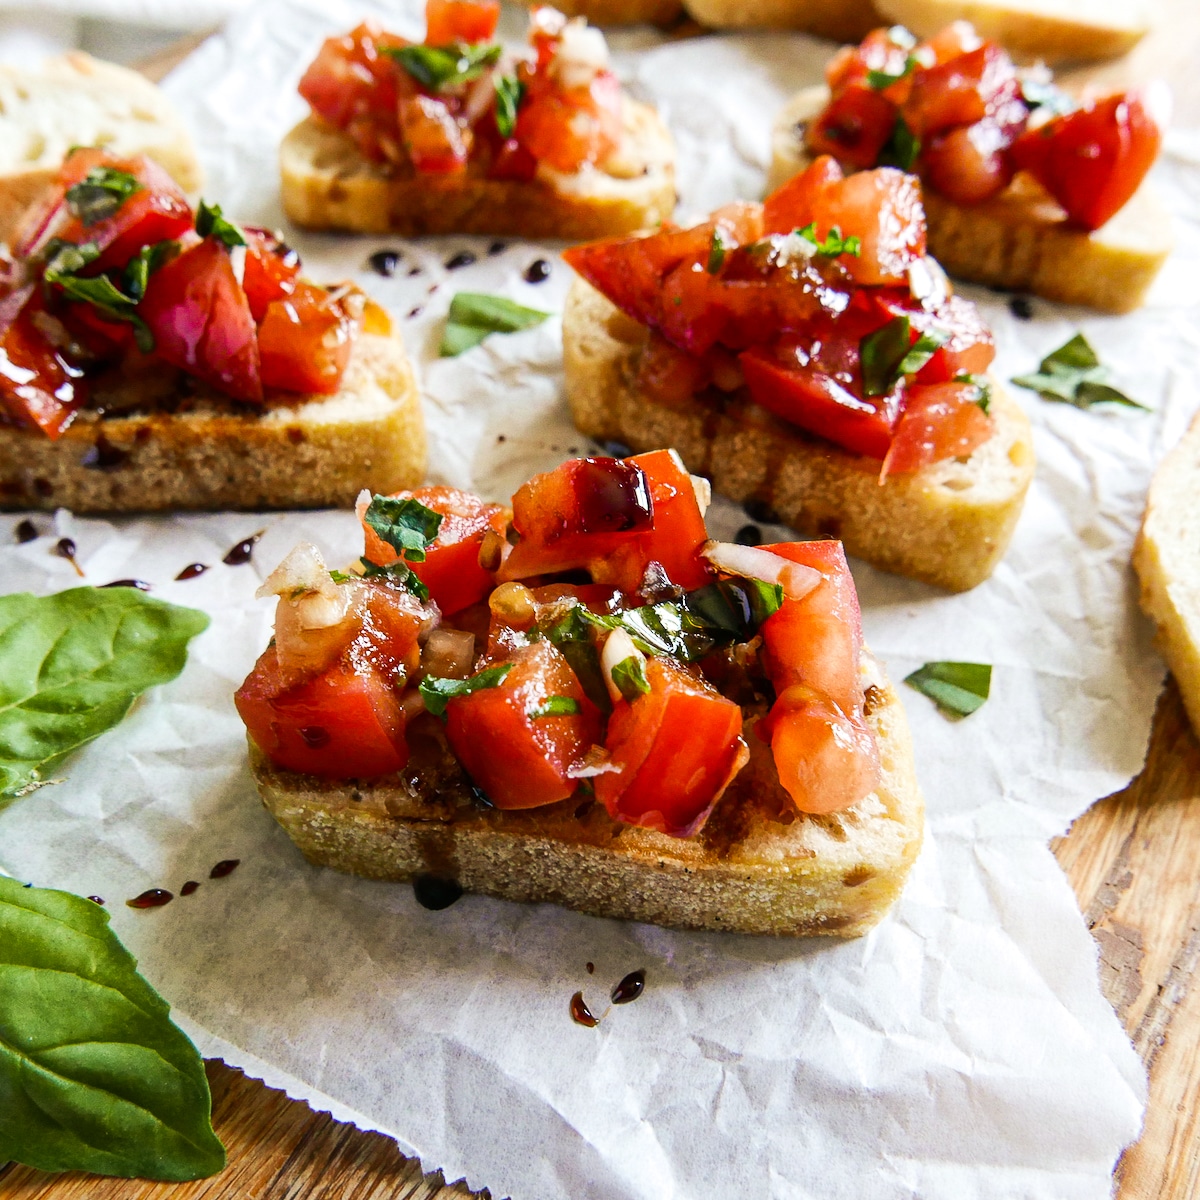 Balsamic bruschetta arranged on parchment paper with fresh basil.